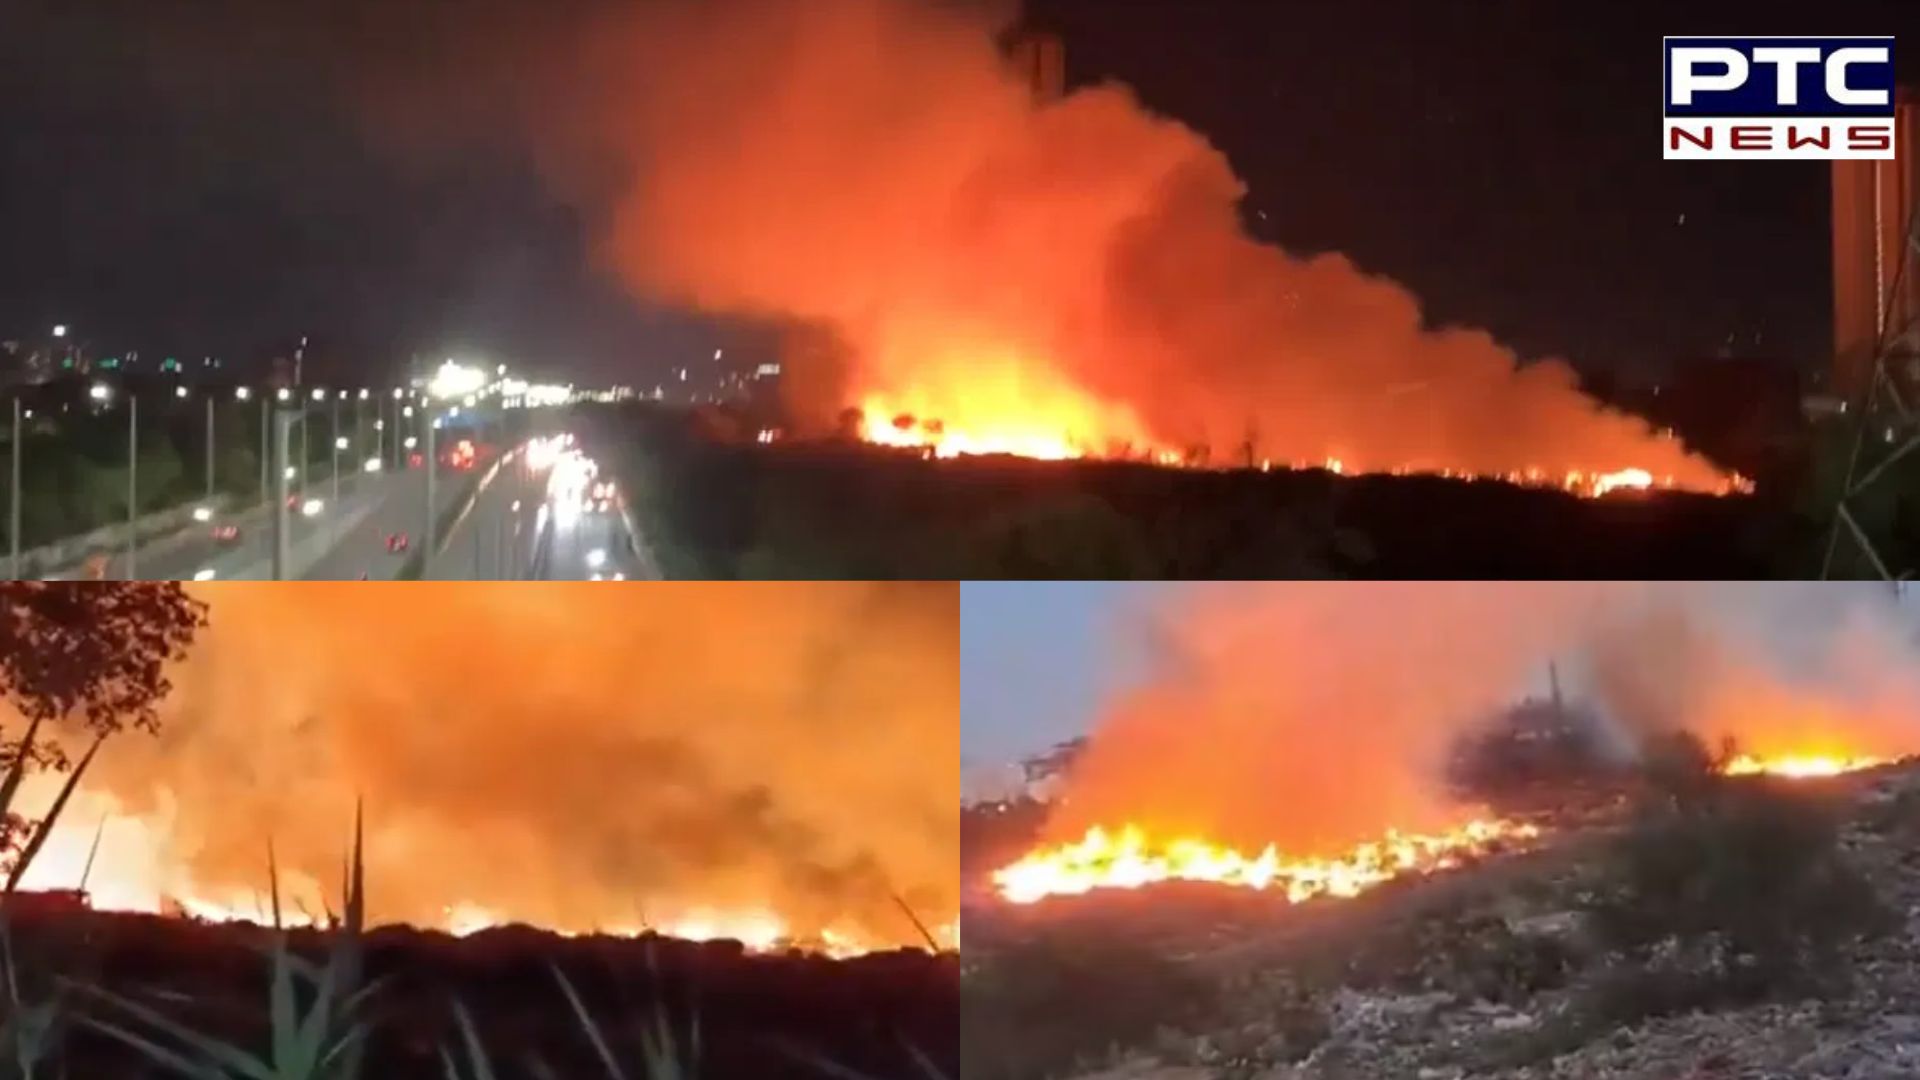 Massive fire at Noida dumping yard; firefighters unable to quell blaze even after 18 hours